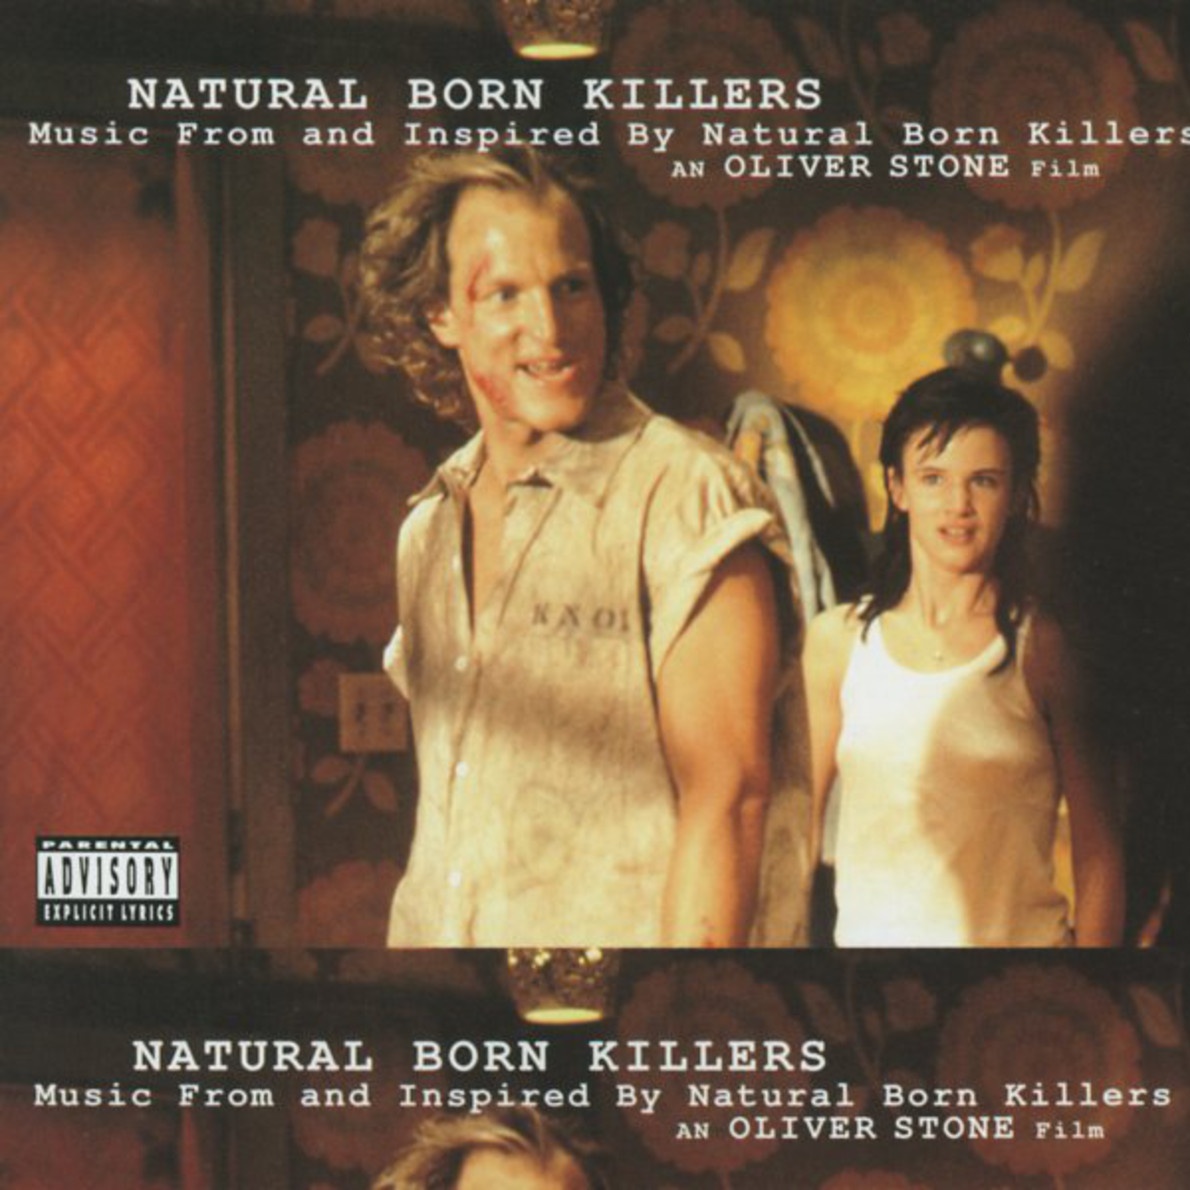 Taboo - From "Natural Born Killers" Soundtrack